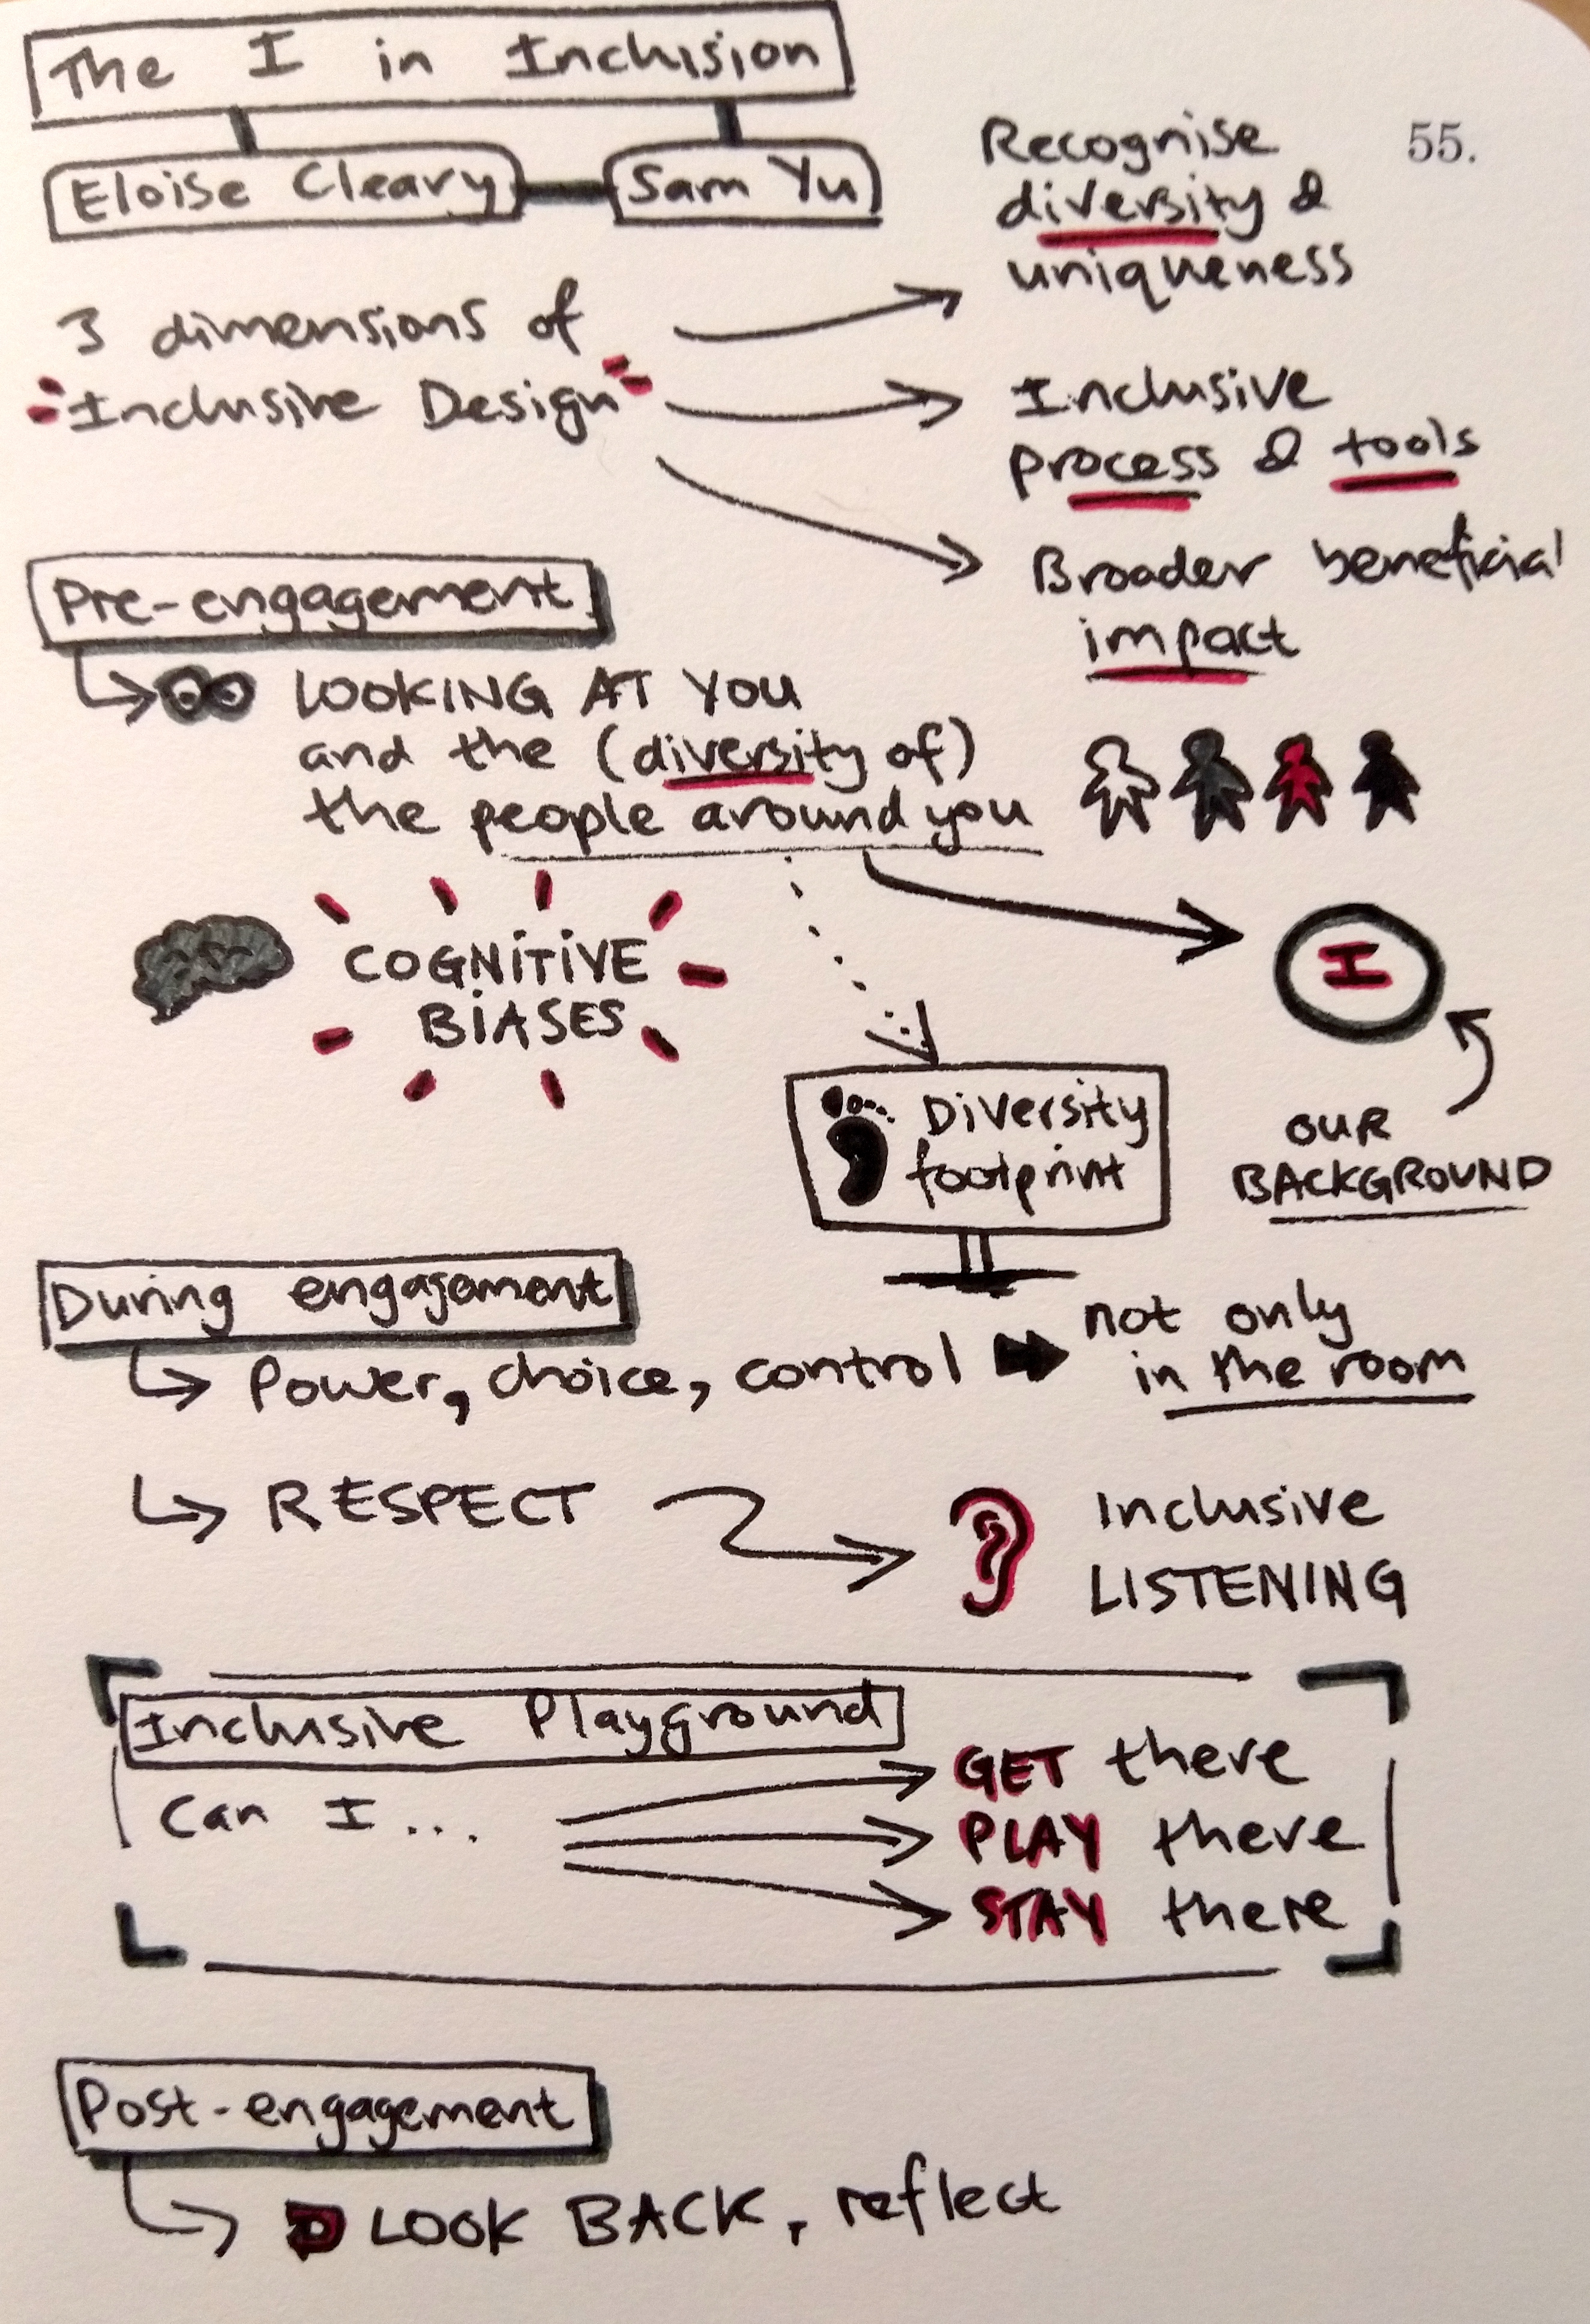 Sketchnotes for Eloise Cleary and Samuel Yu - The I in Inclusion